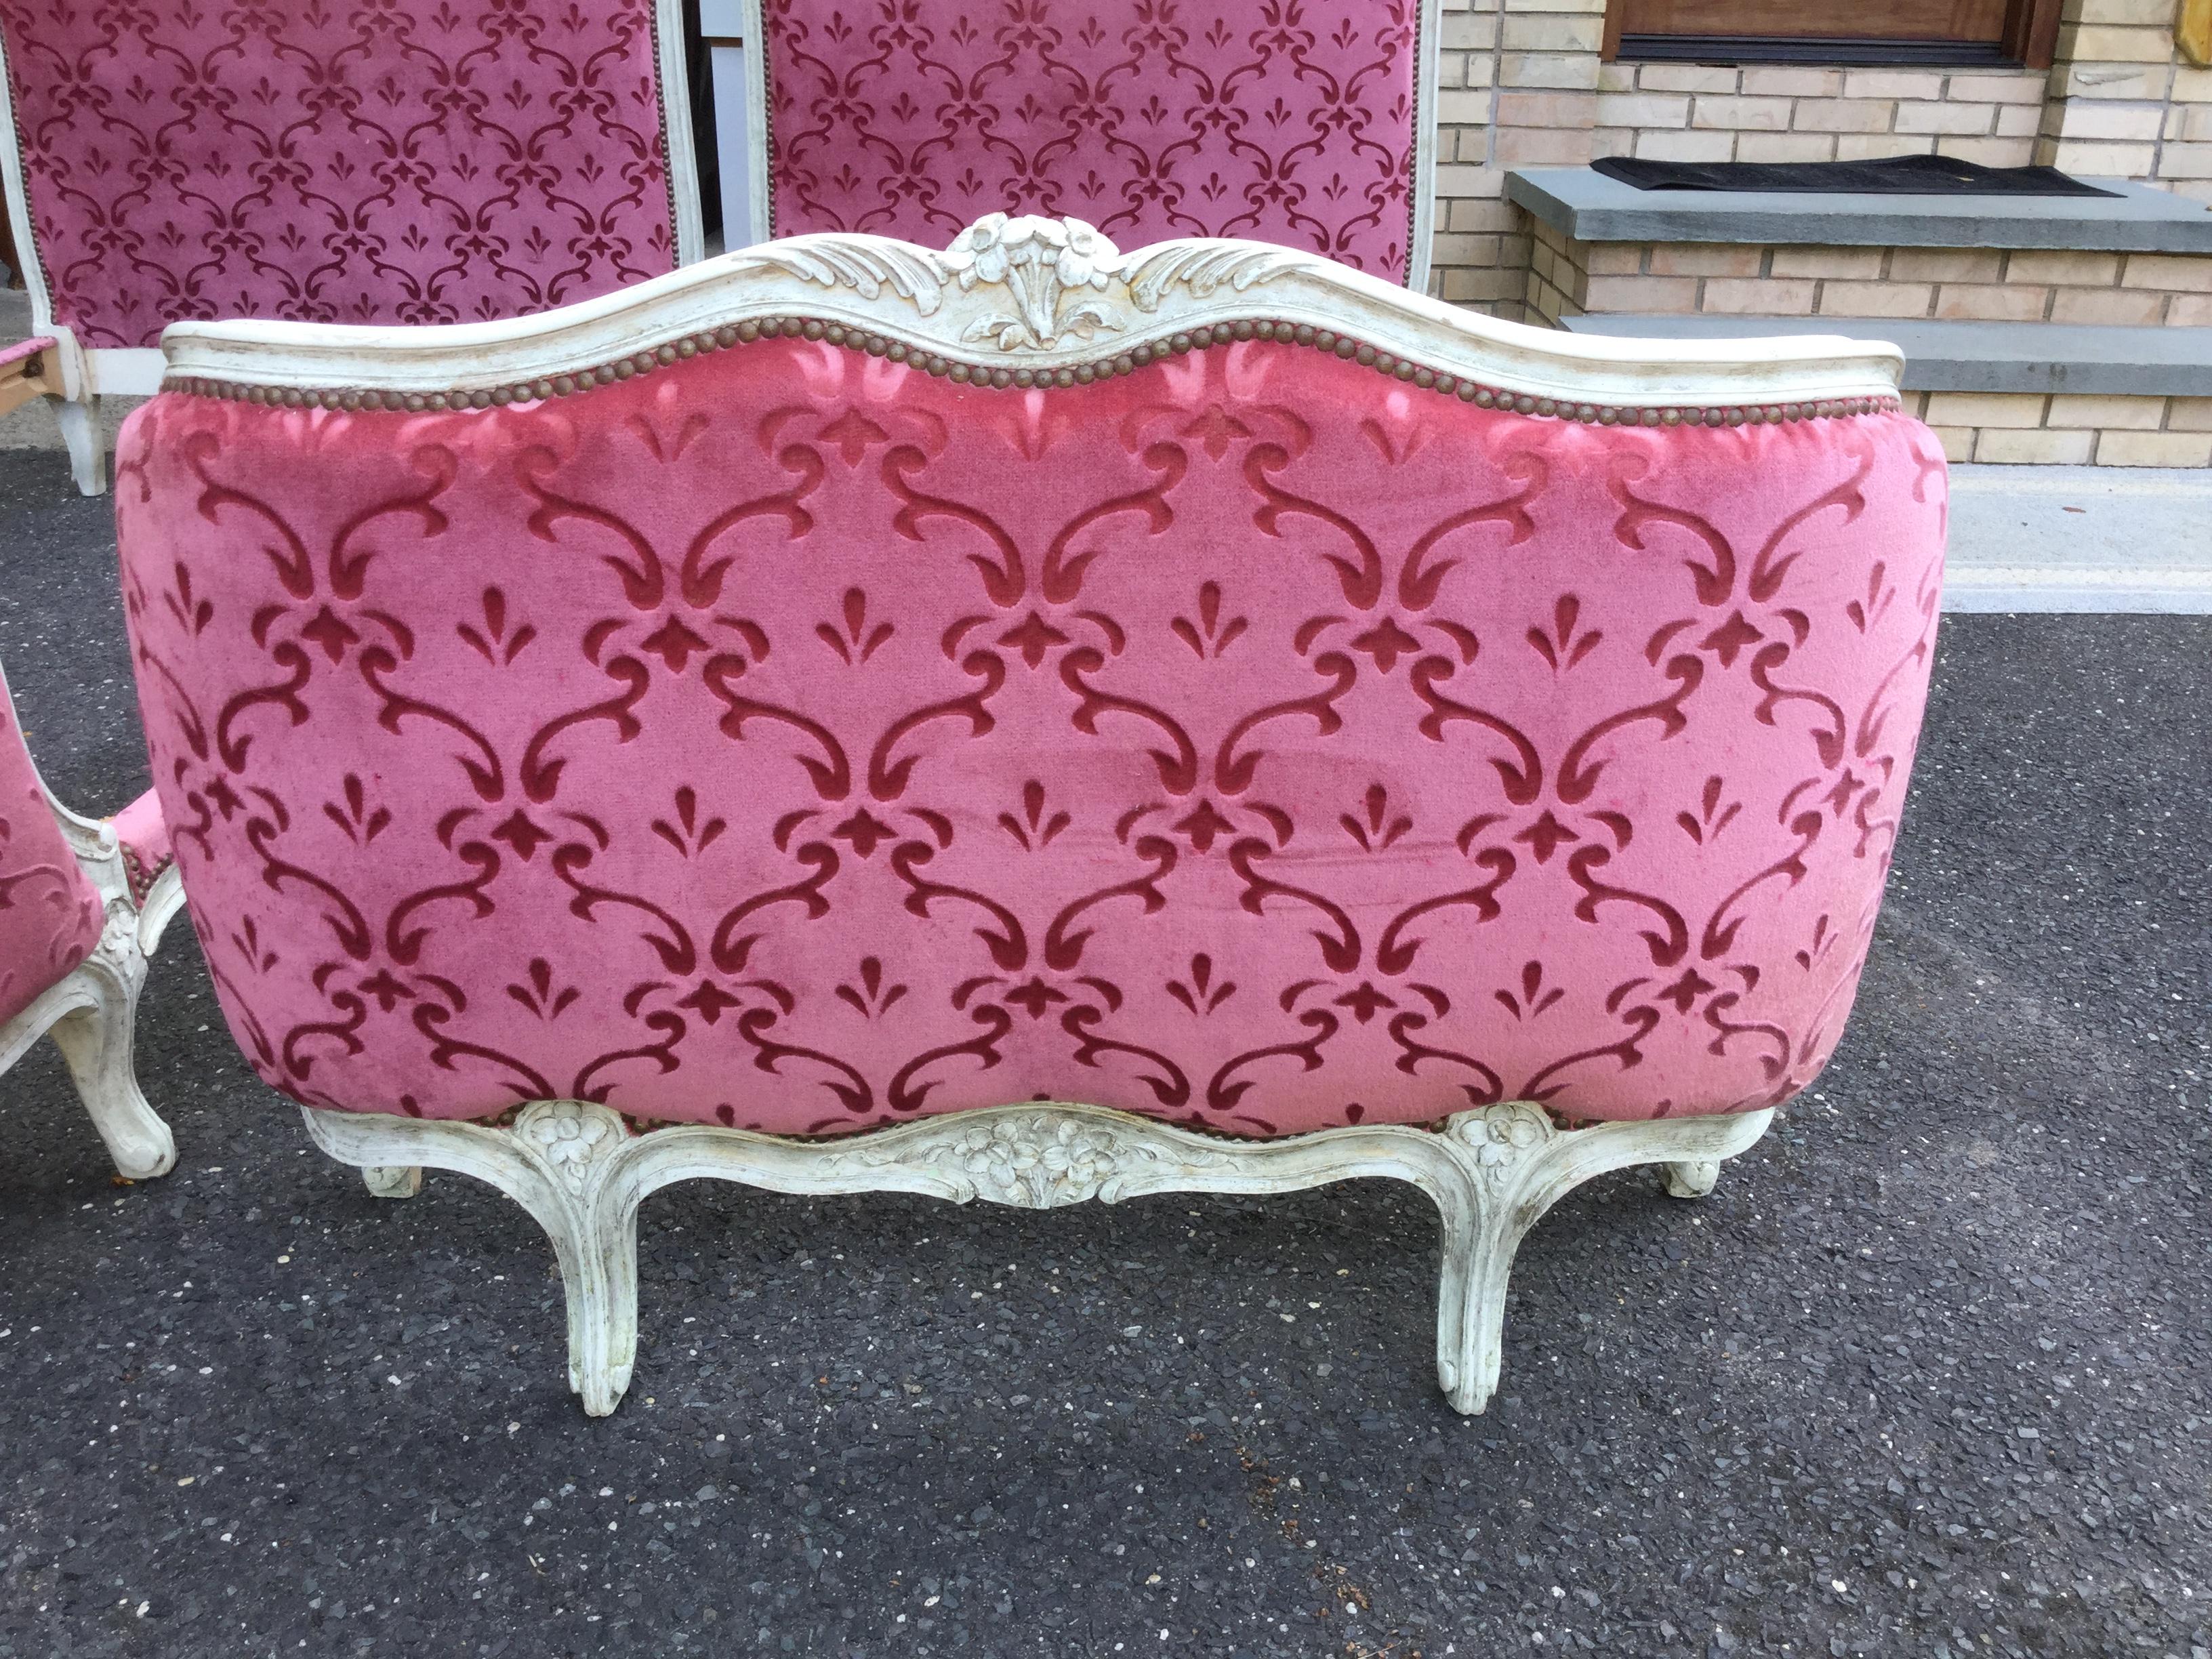 Gorgeous pair of French painted twin beds. Upholstered in a stunning hot pink velvet which has no stains but they do have some slits and scratches on the head board and foot board. The painted carved wood frame is cream with gold brush strokes that